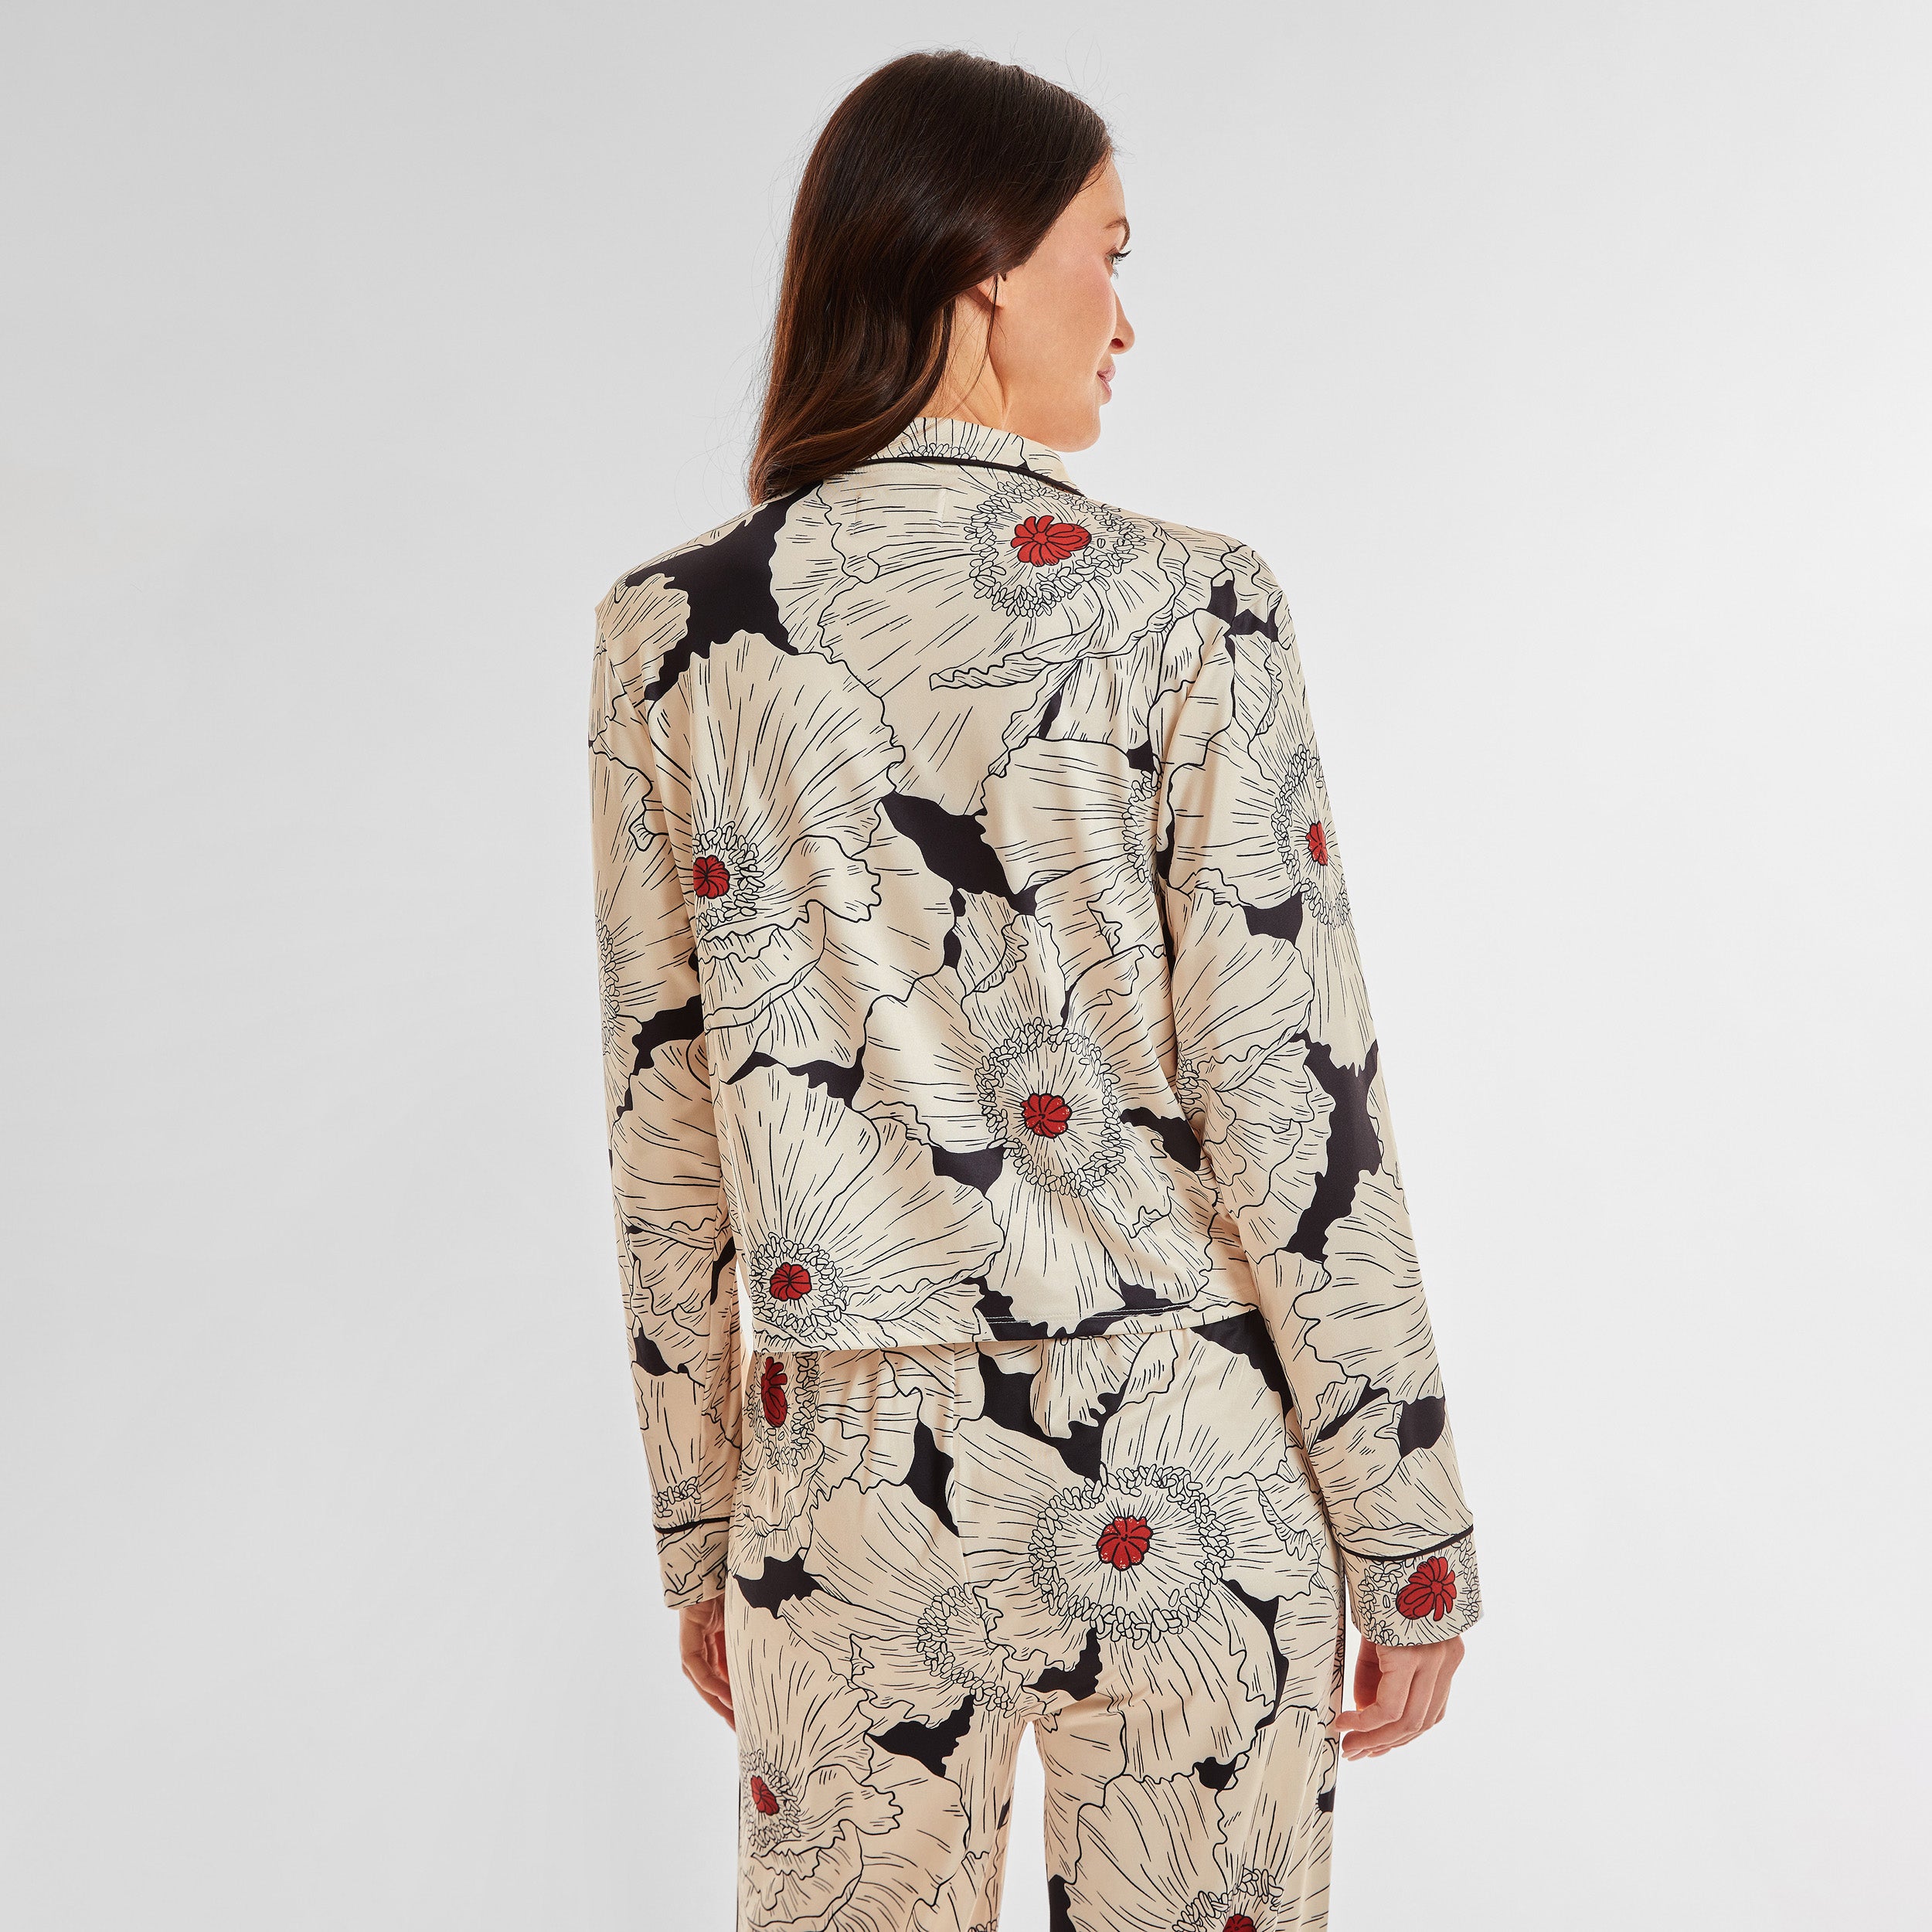 Rear view of woman wearing breathable, relaxed and buttery smooth pajama shirt featuring a button front top with notch collar and Poppy Floral print.